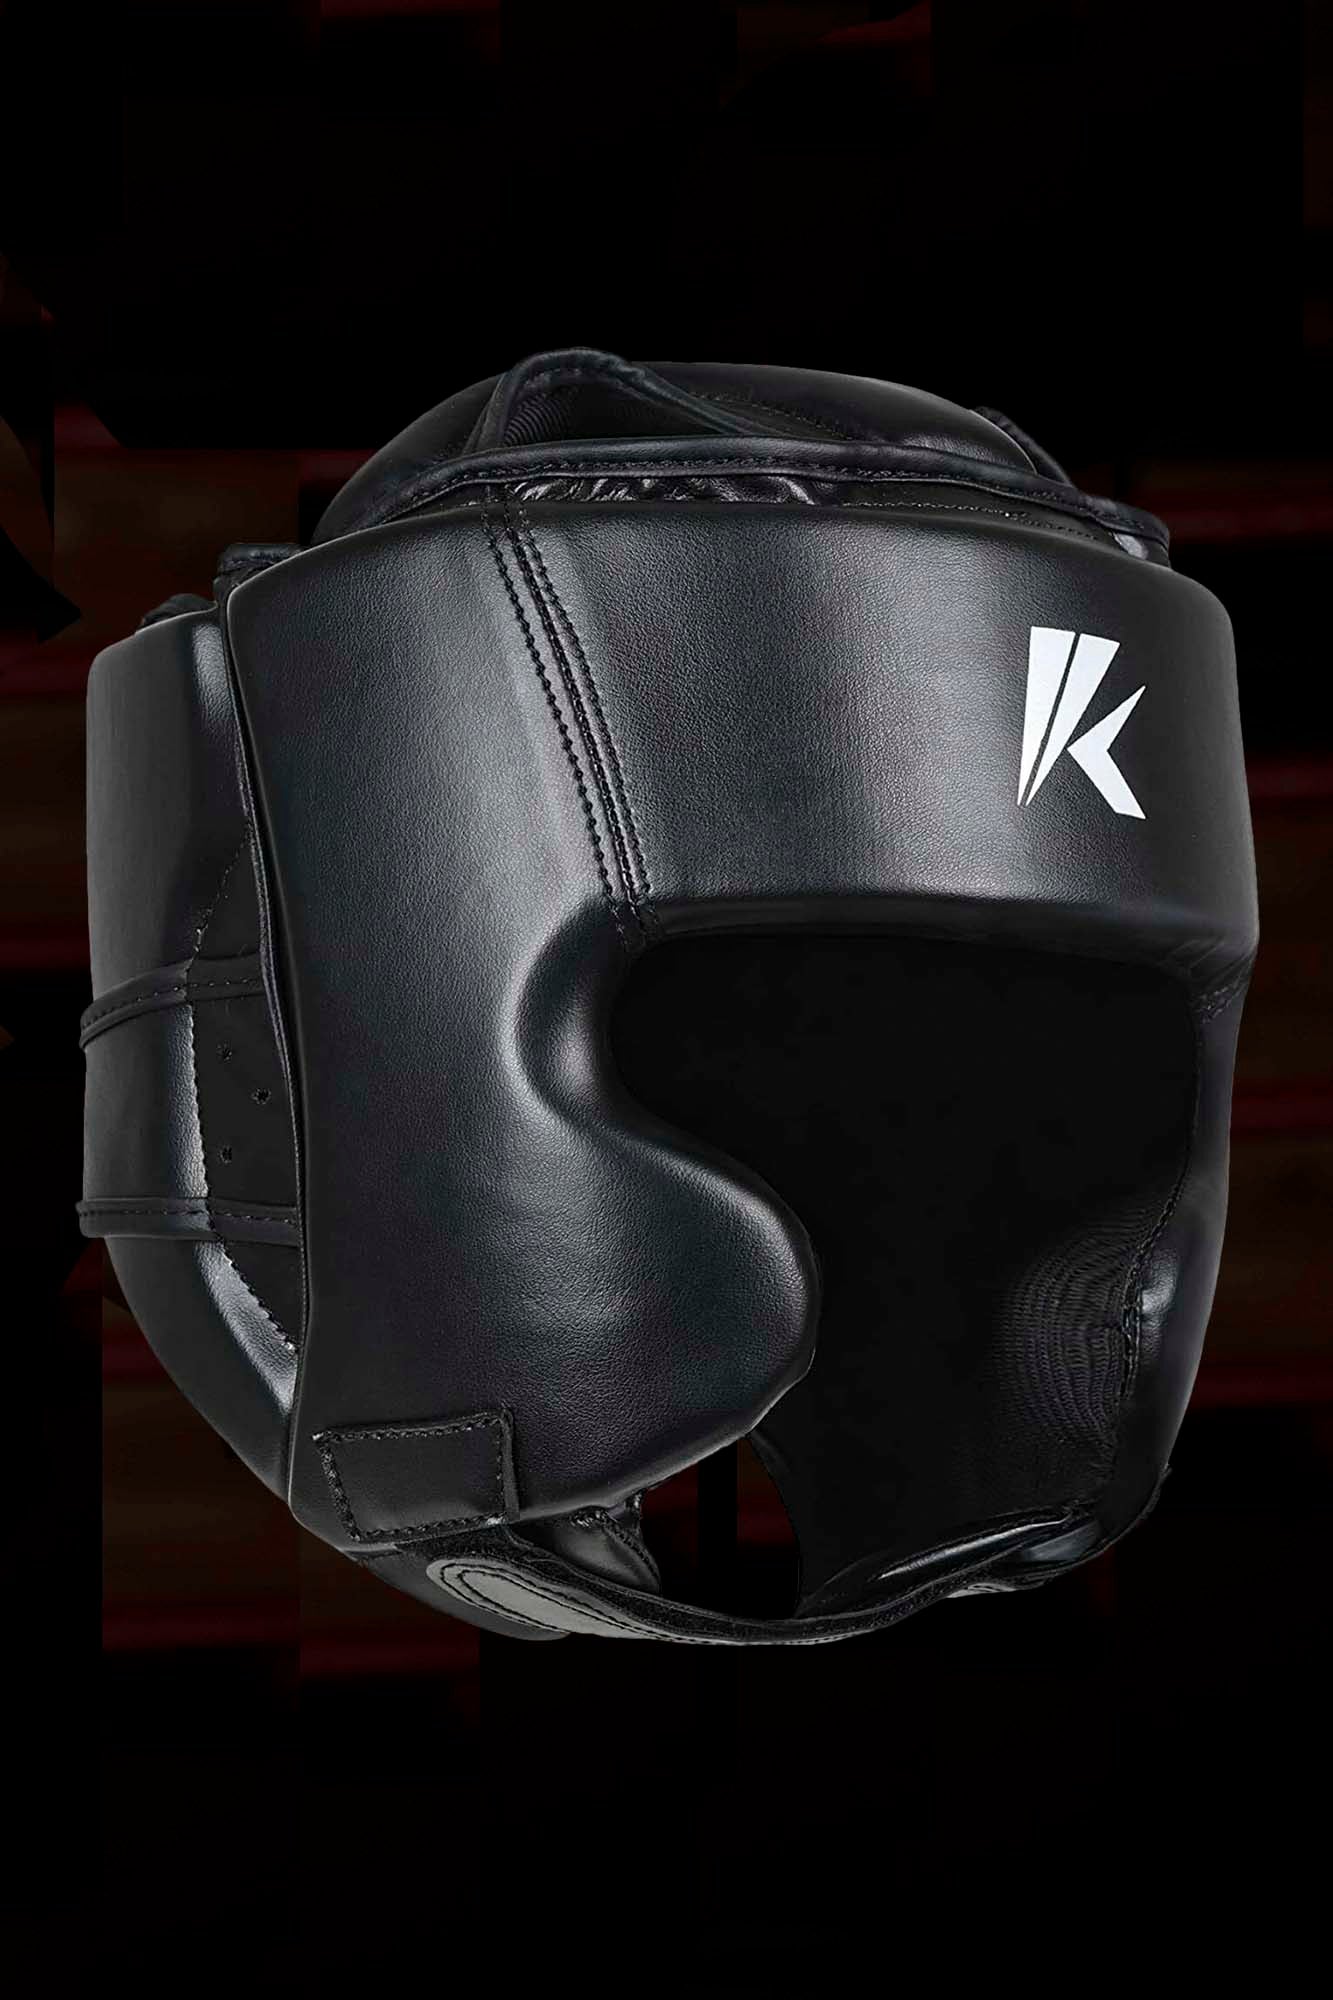 Black Unisex MMA Boxing Head Guard for Head Protection